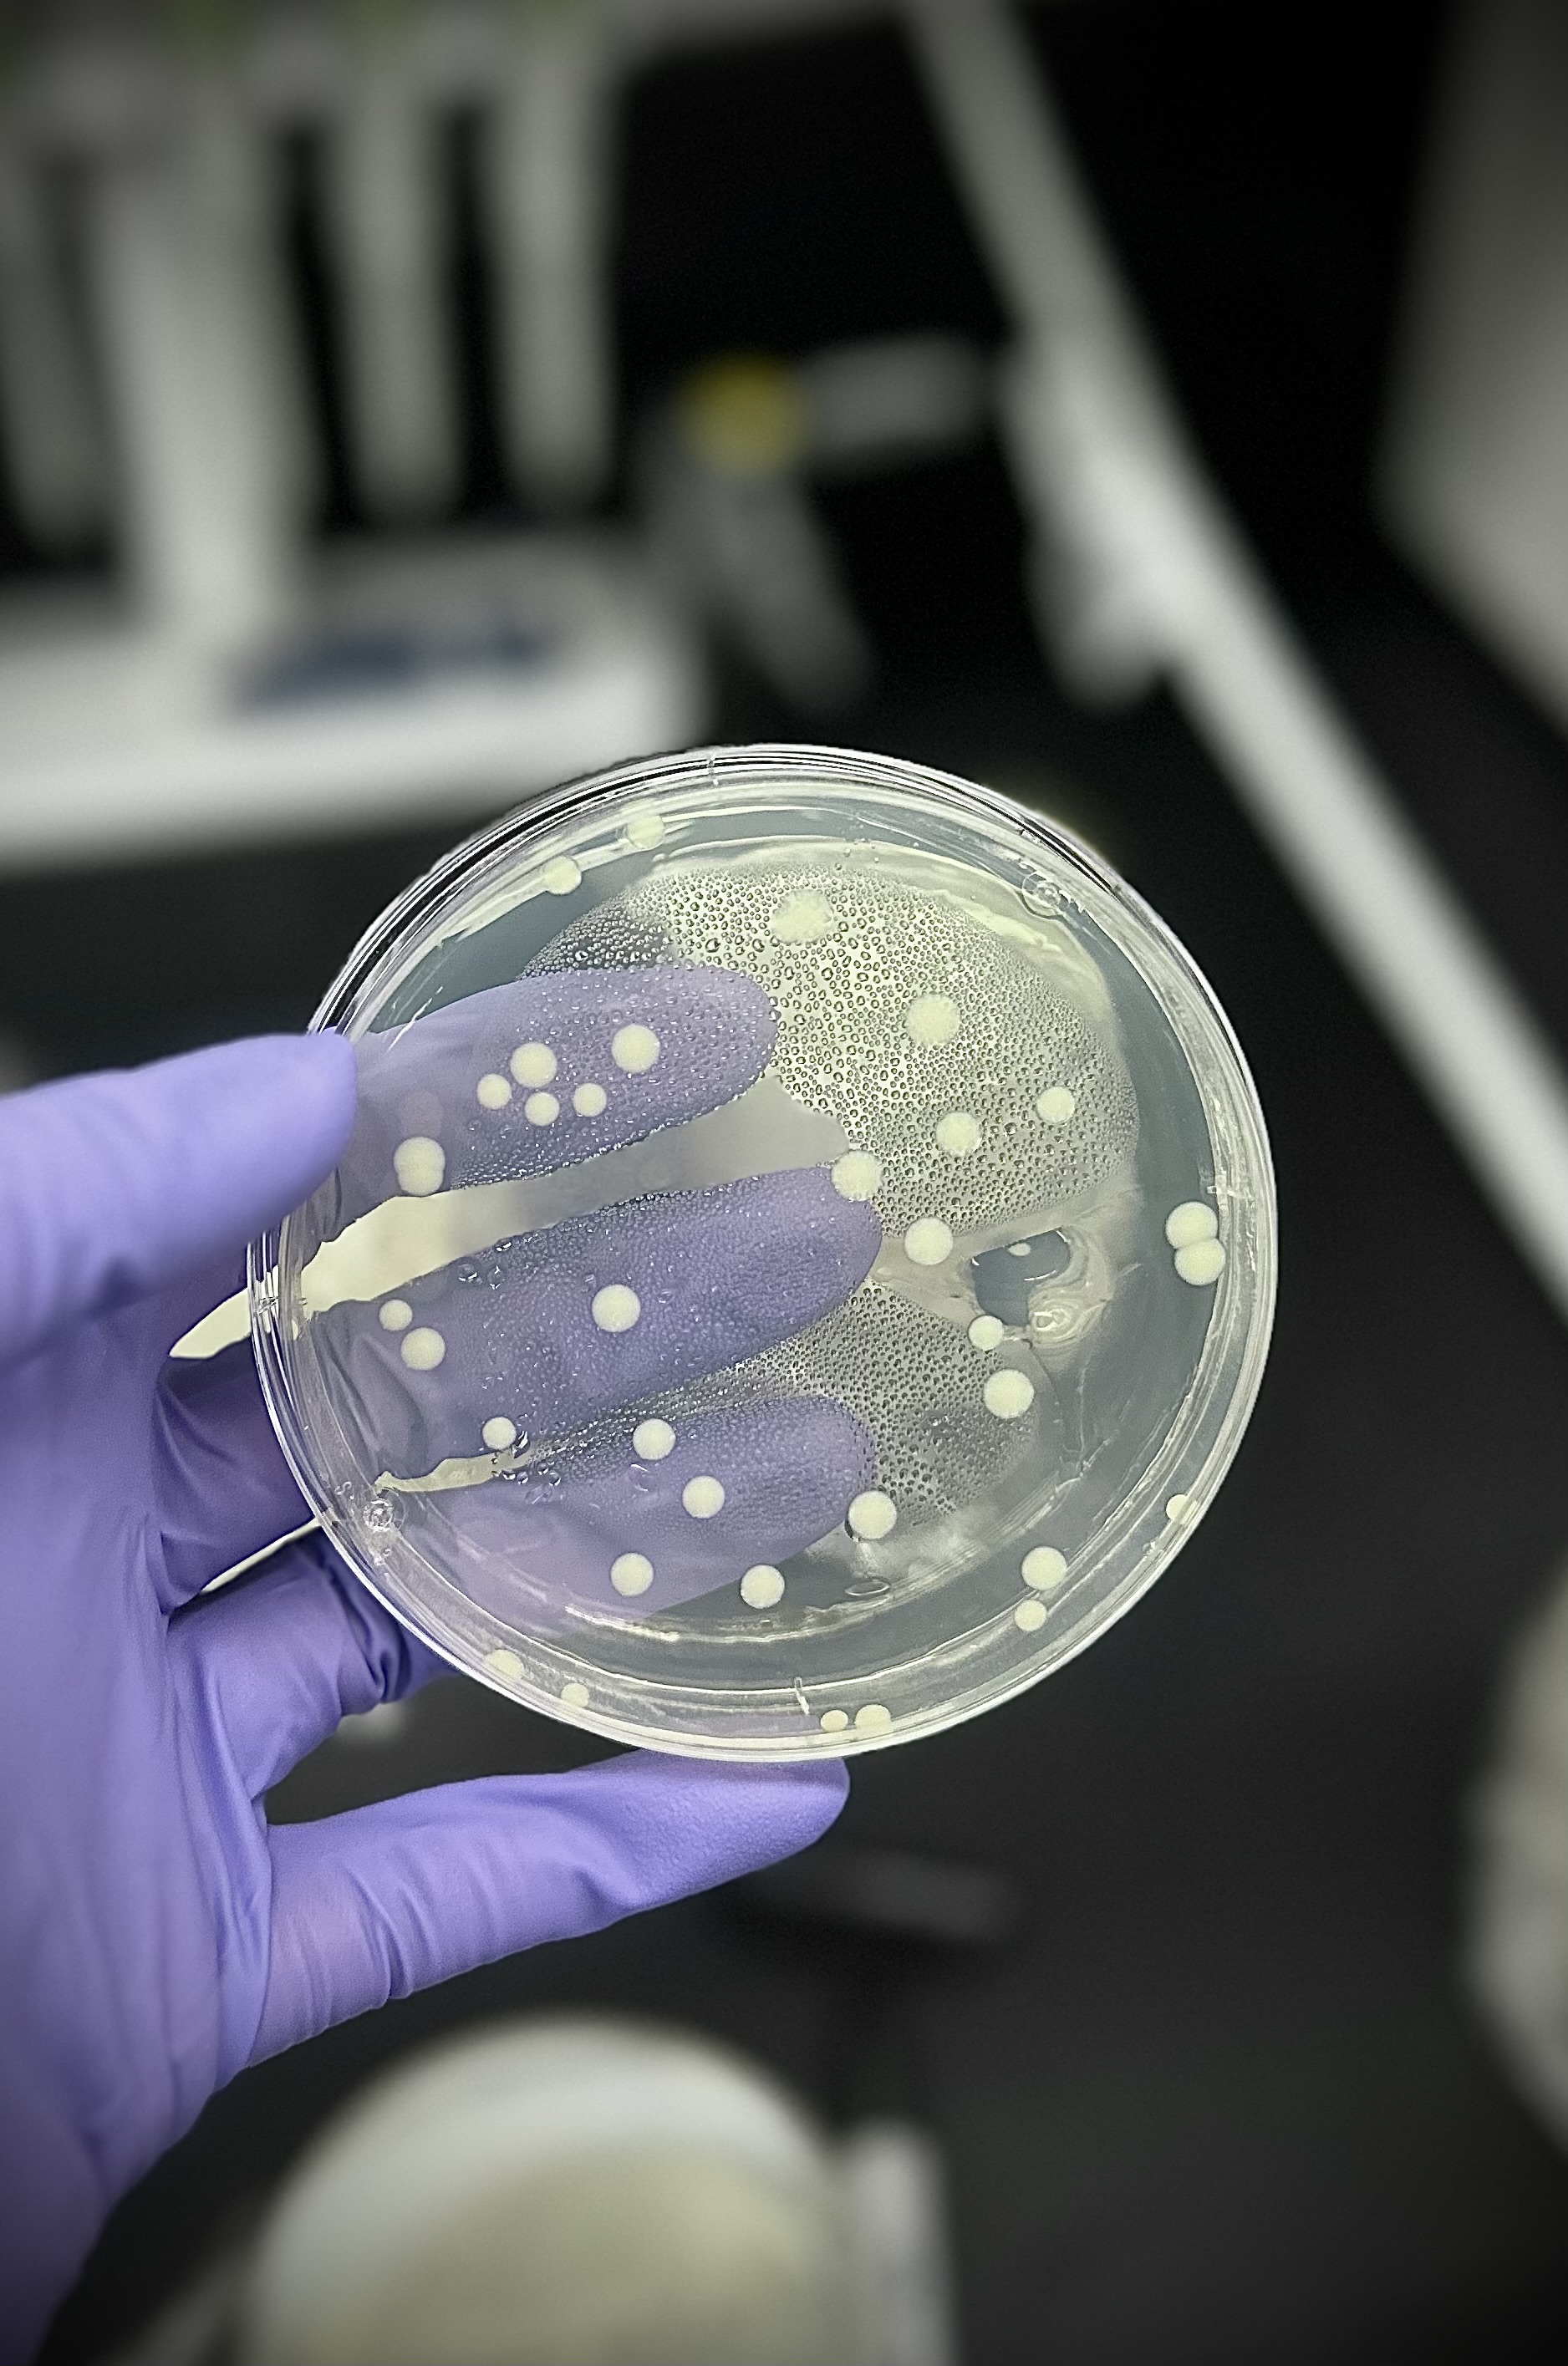 A hand in a purple glove holding a petri dish with salmonella in it.